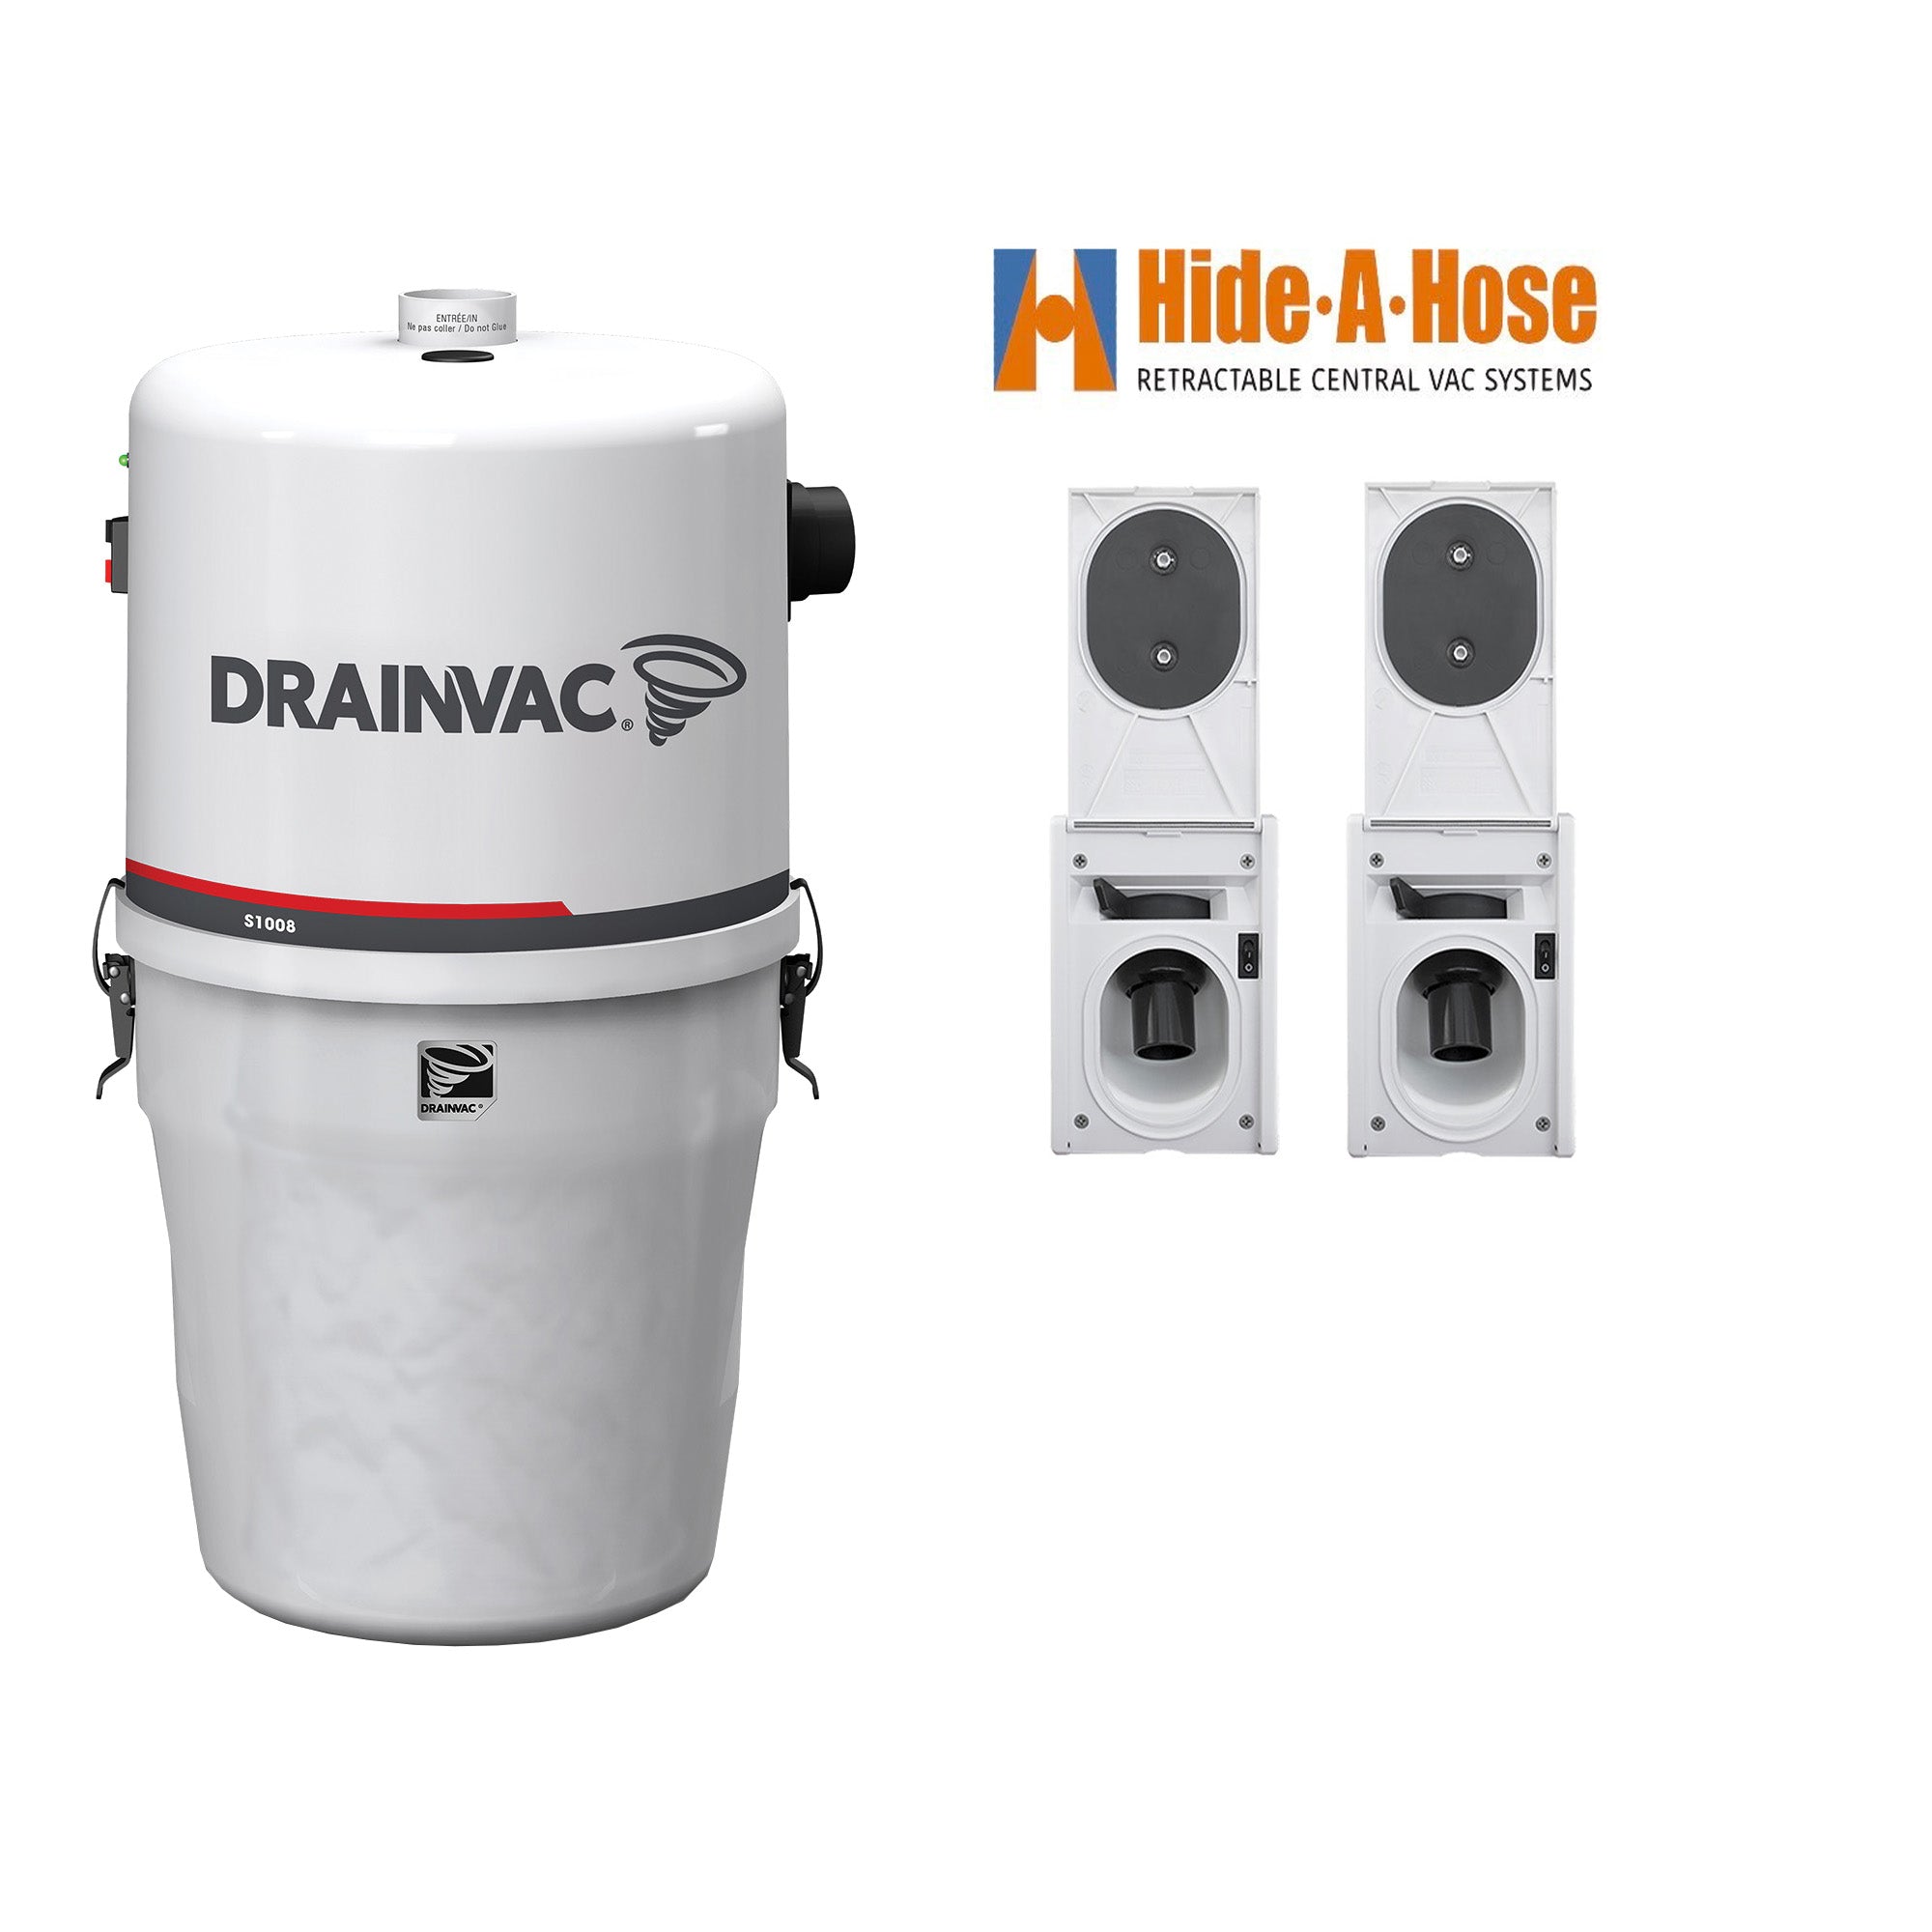 DrainVac Compact S1008 Central Vacuum with Hide-A-Hose Installation Package (2 Valves)